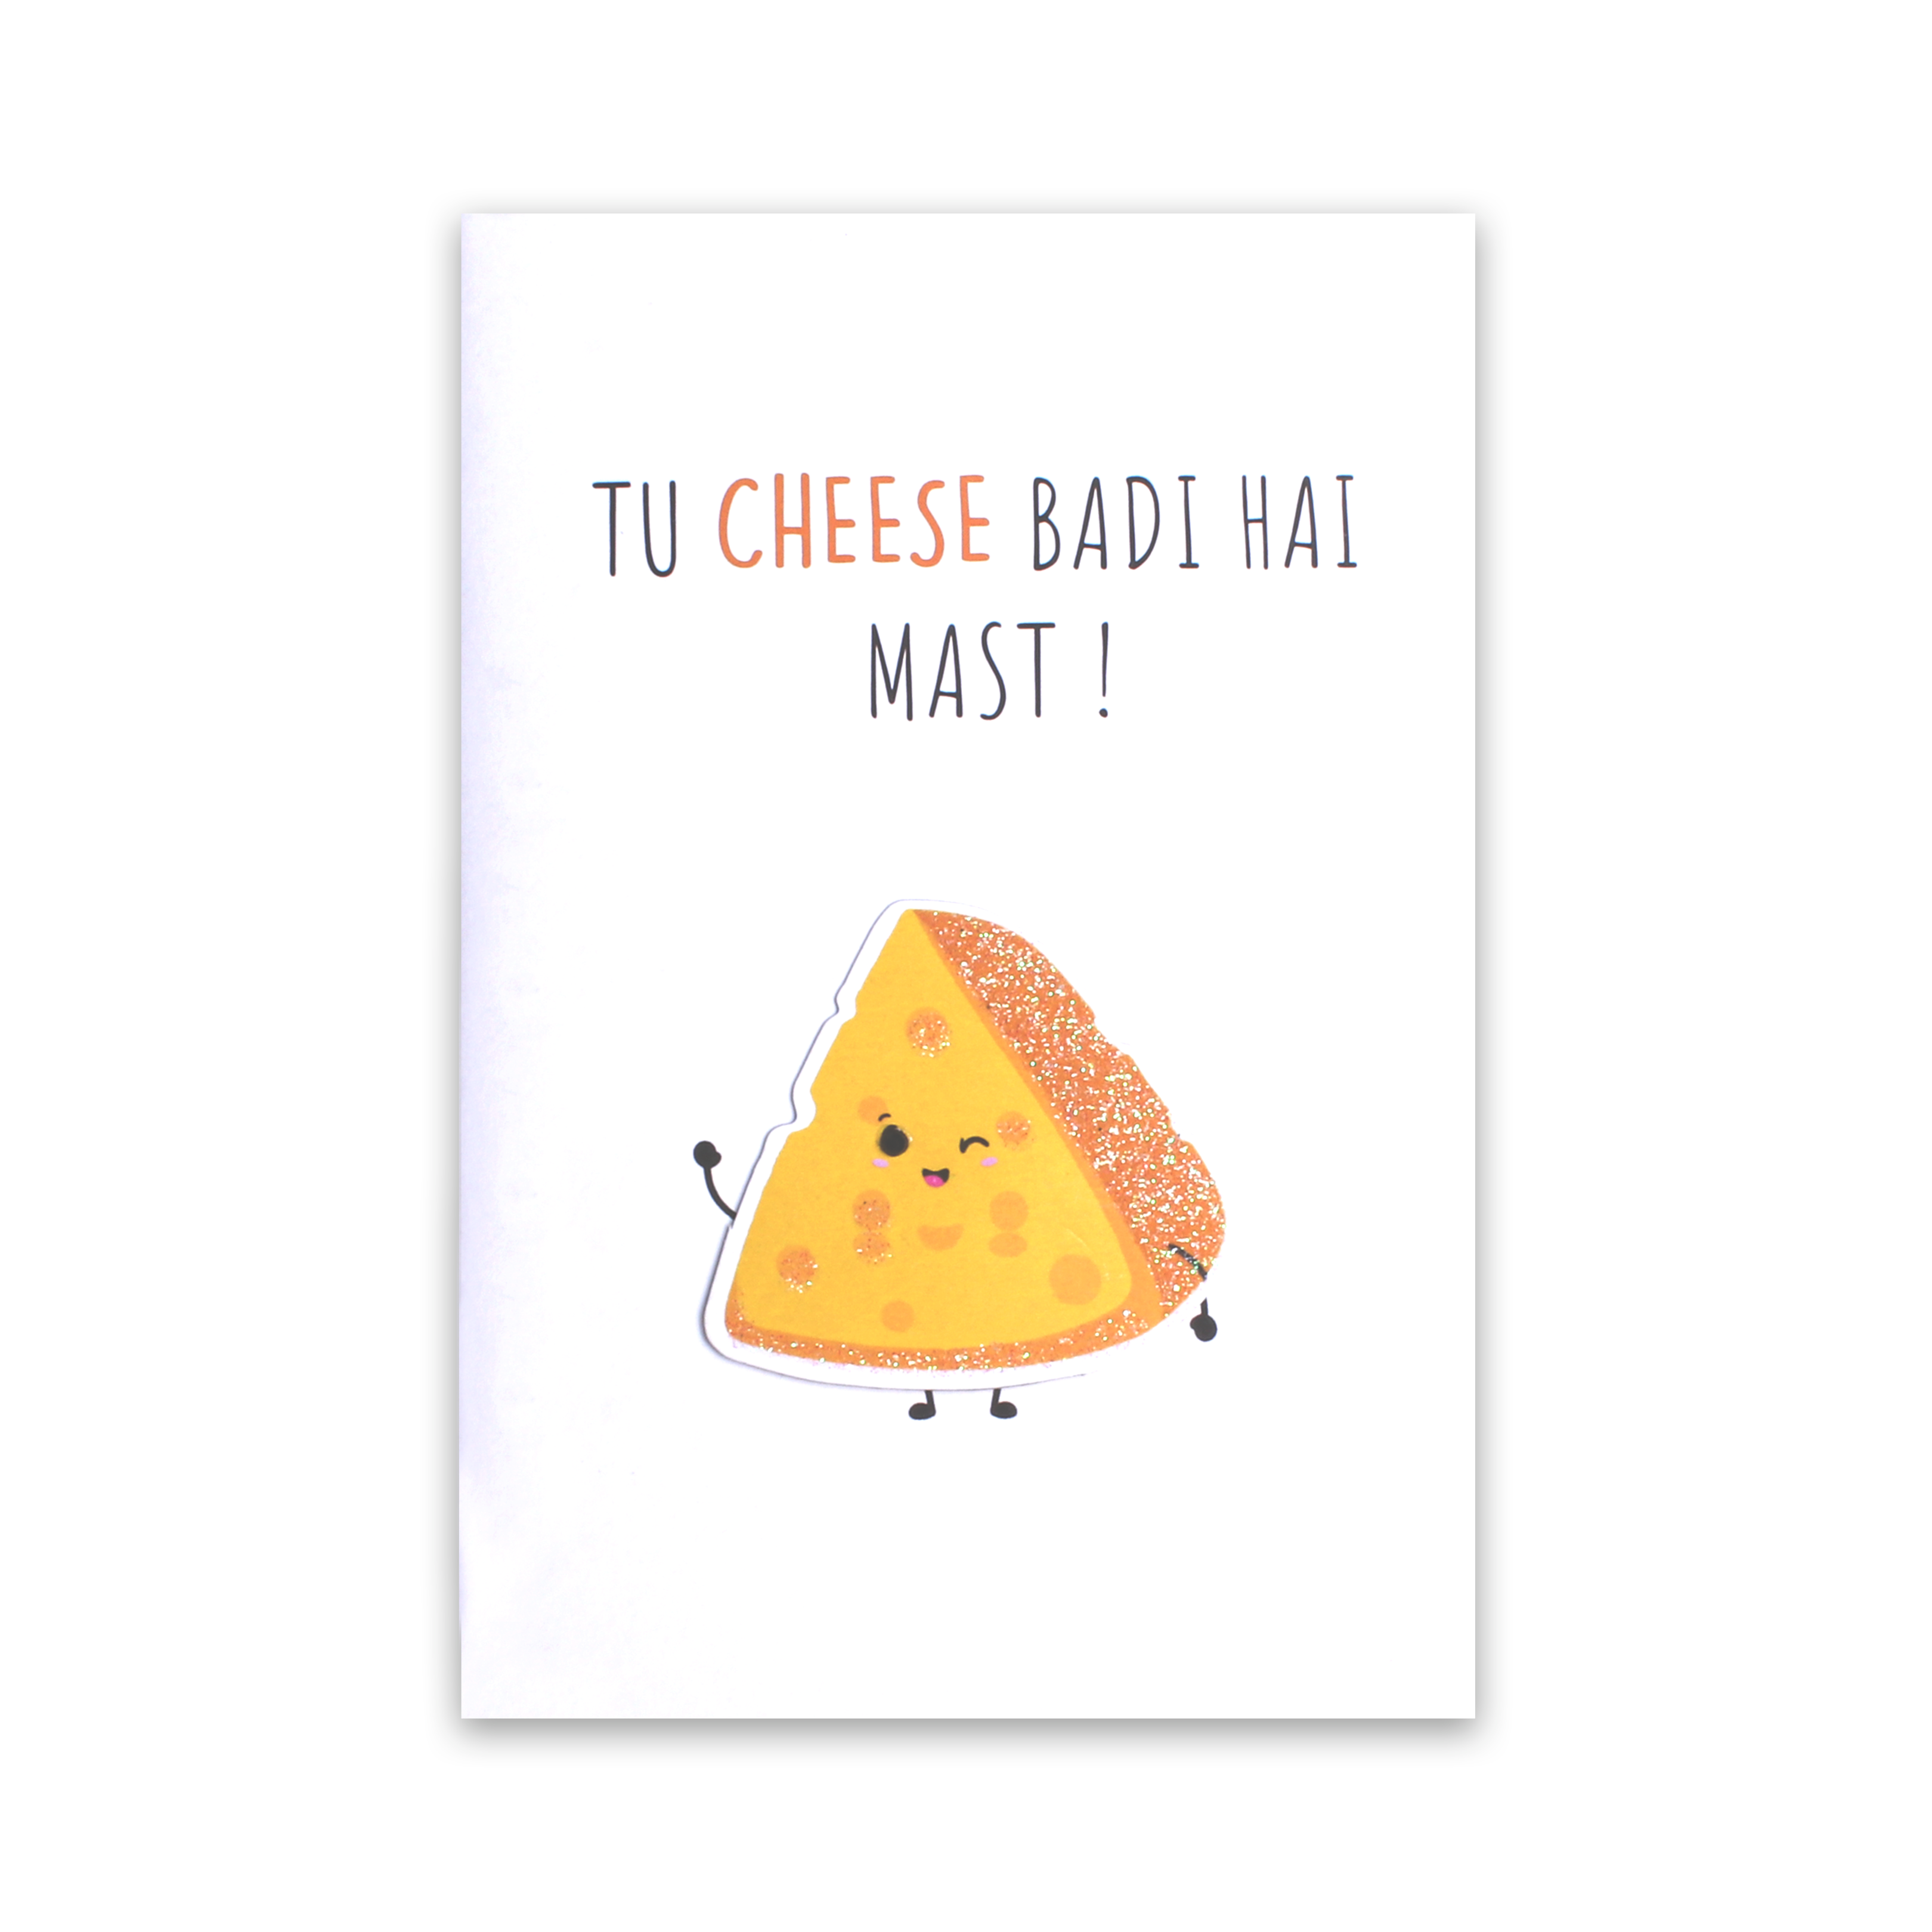 Greeting Card & Envelope Mast Cheese 4 X 6inch 2pc